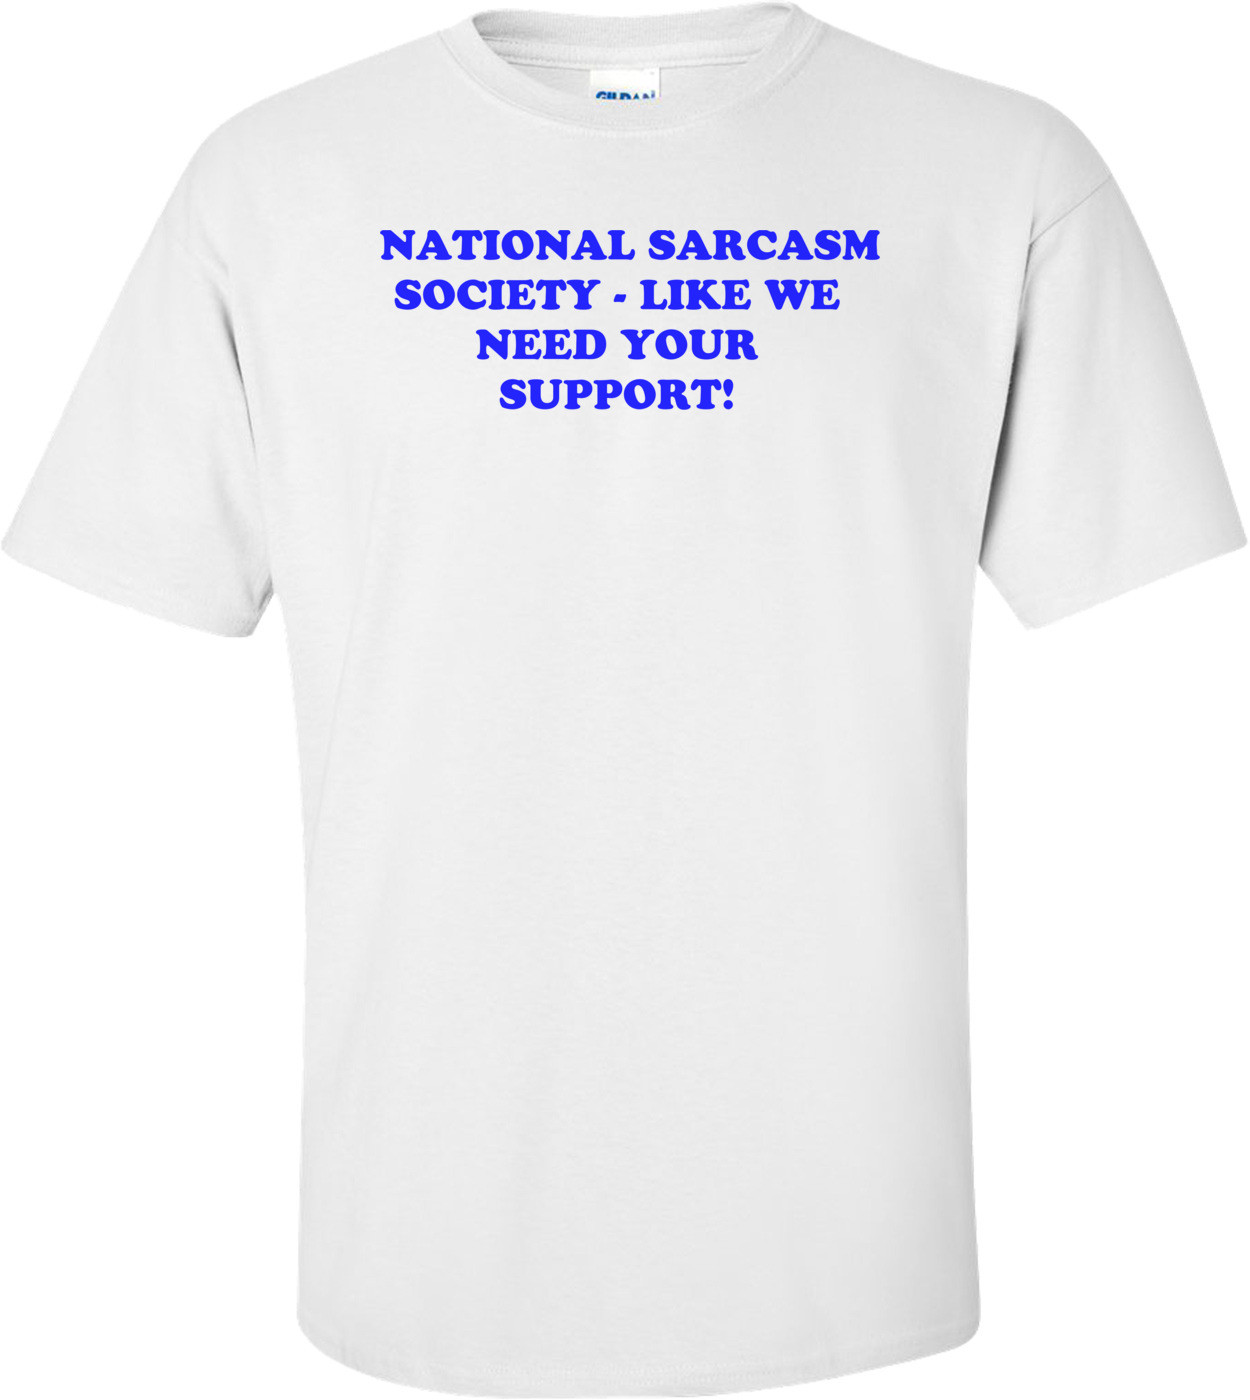   NATIONAL SARCASM SOCIETY - LIKE WE NEED YOUR SUPPORT! Shirt